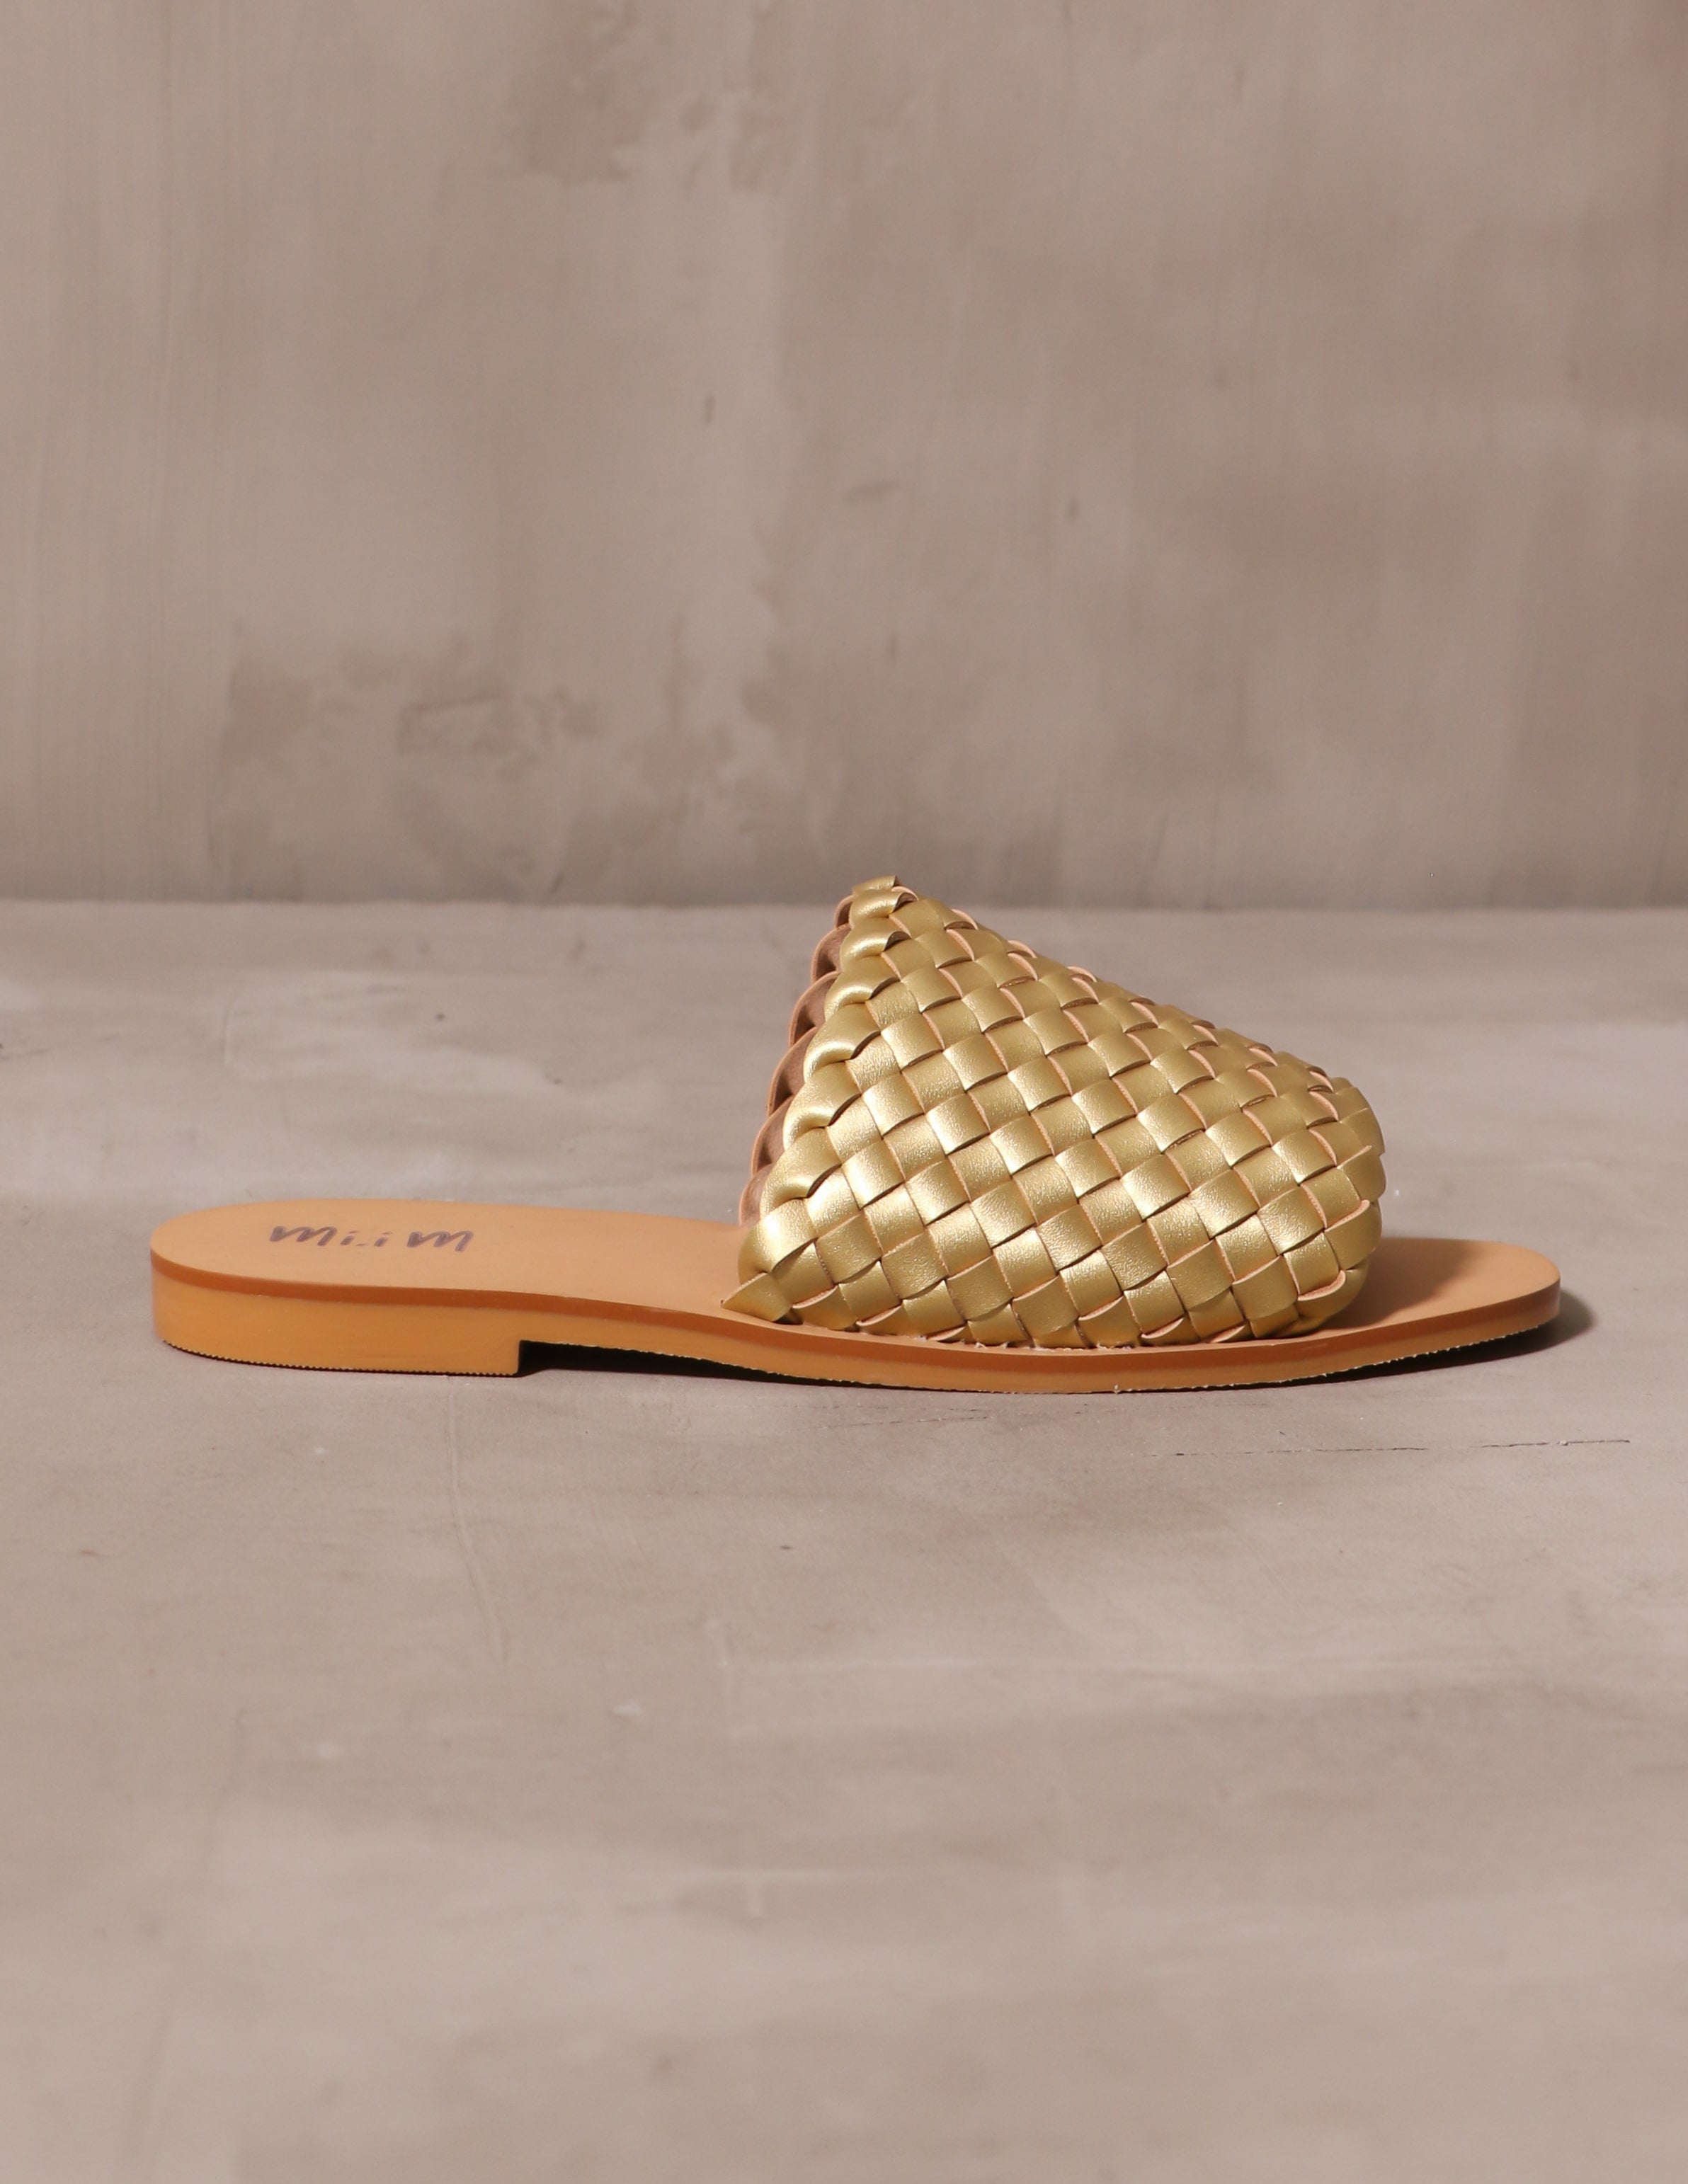 gold woven one slide sandal on cement background